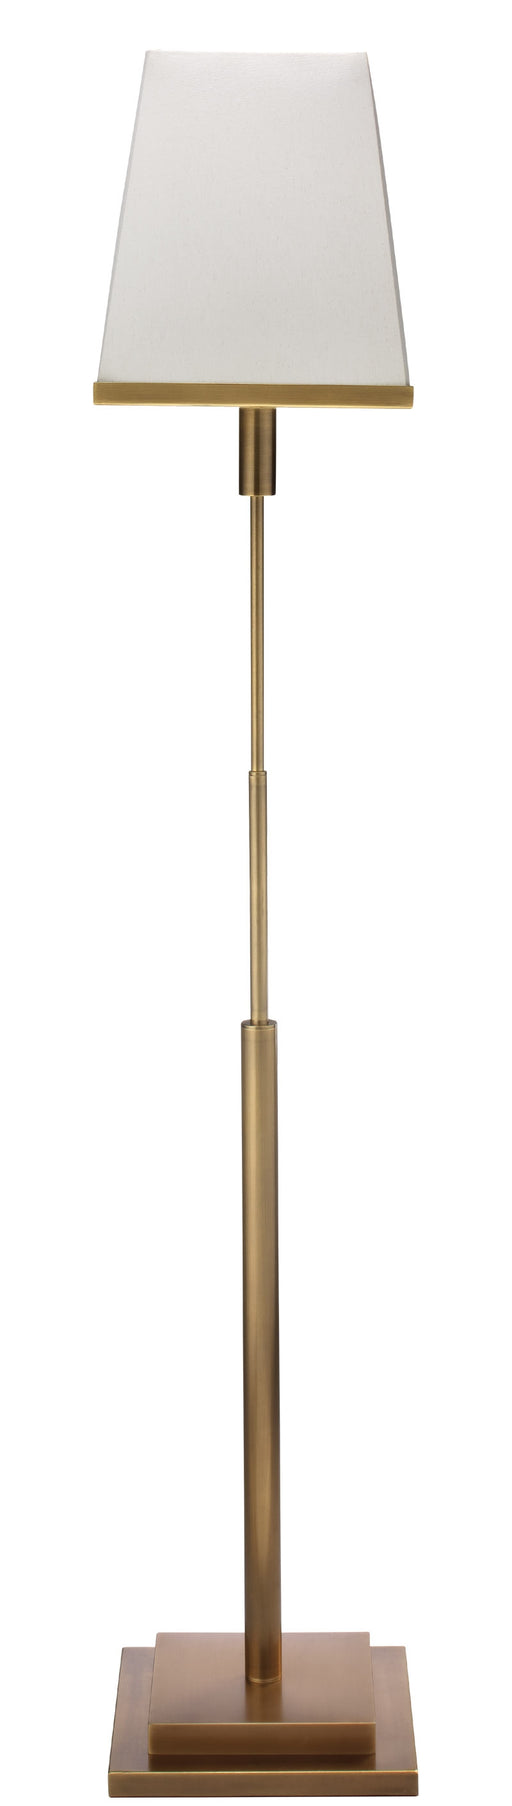 Jamie Young Company - Jud Floor Lamp in Antique Brass with Large Square Open Cone Shade in White Linen - 1JUD-FLAB